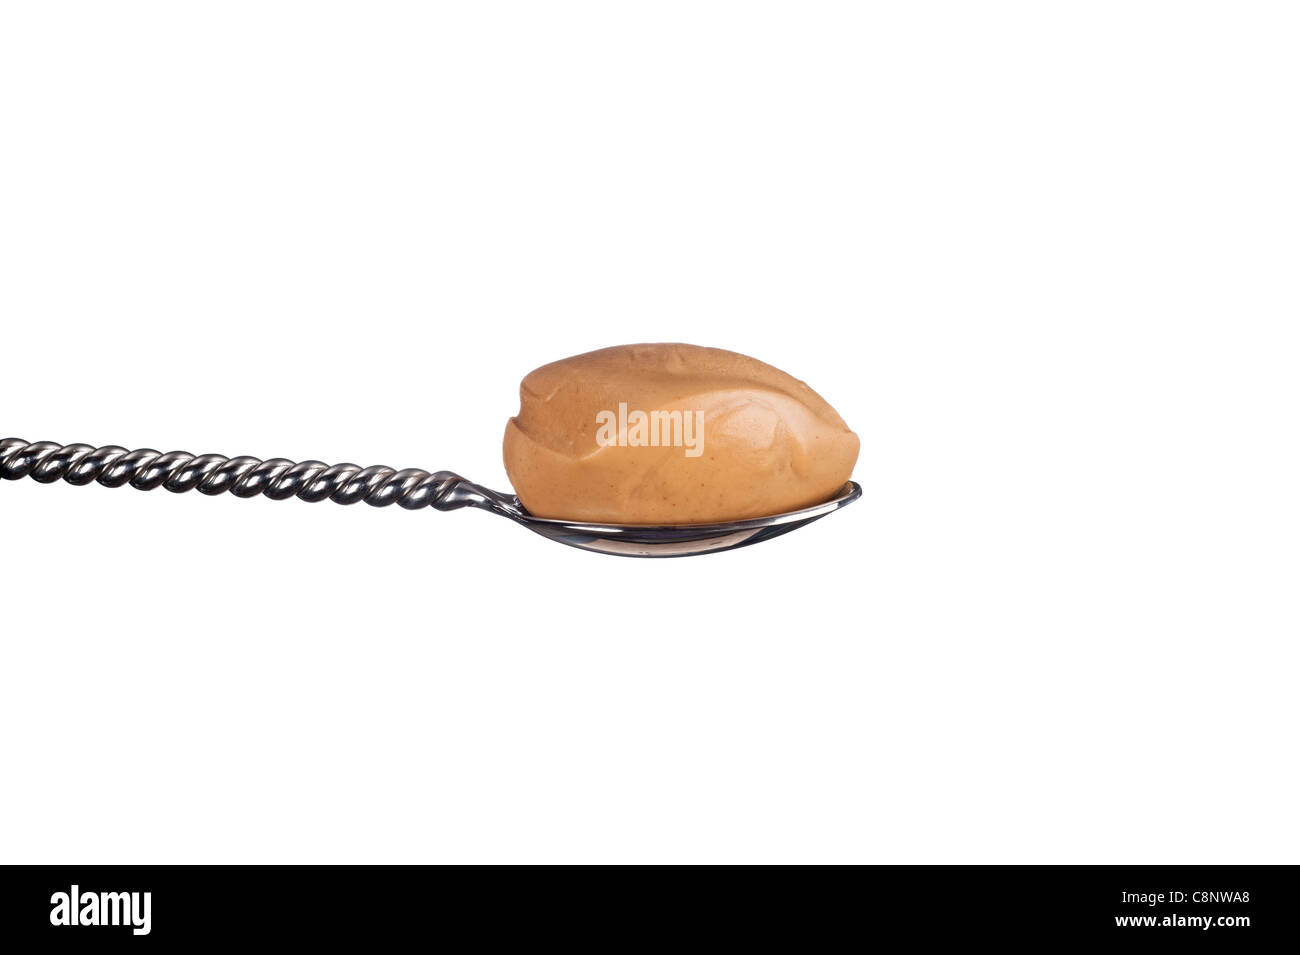 A spoonful of creamy peanut butter isolated on white Stock Photo